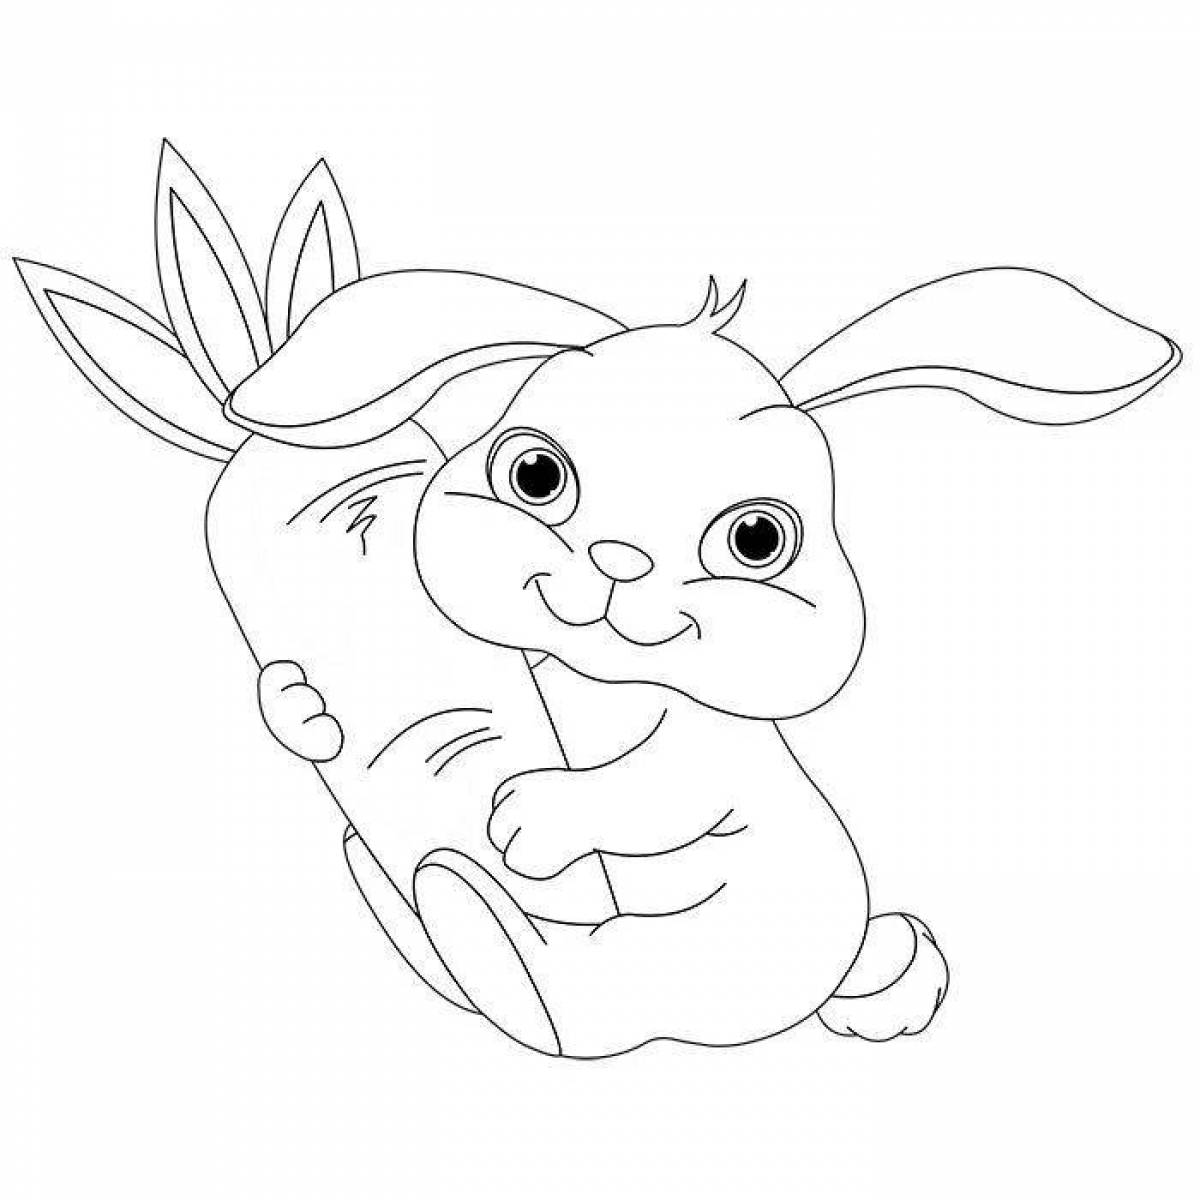 Coloring bunny with a big smile